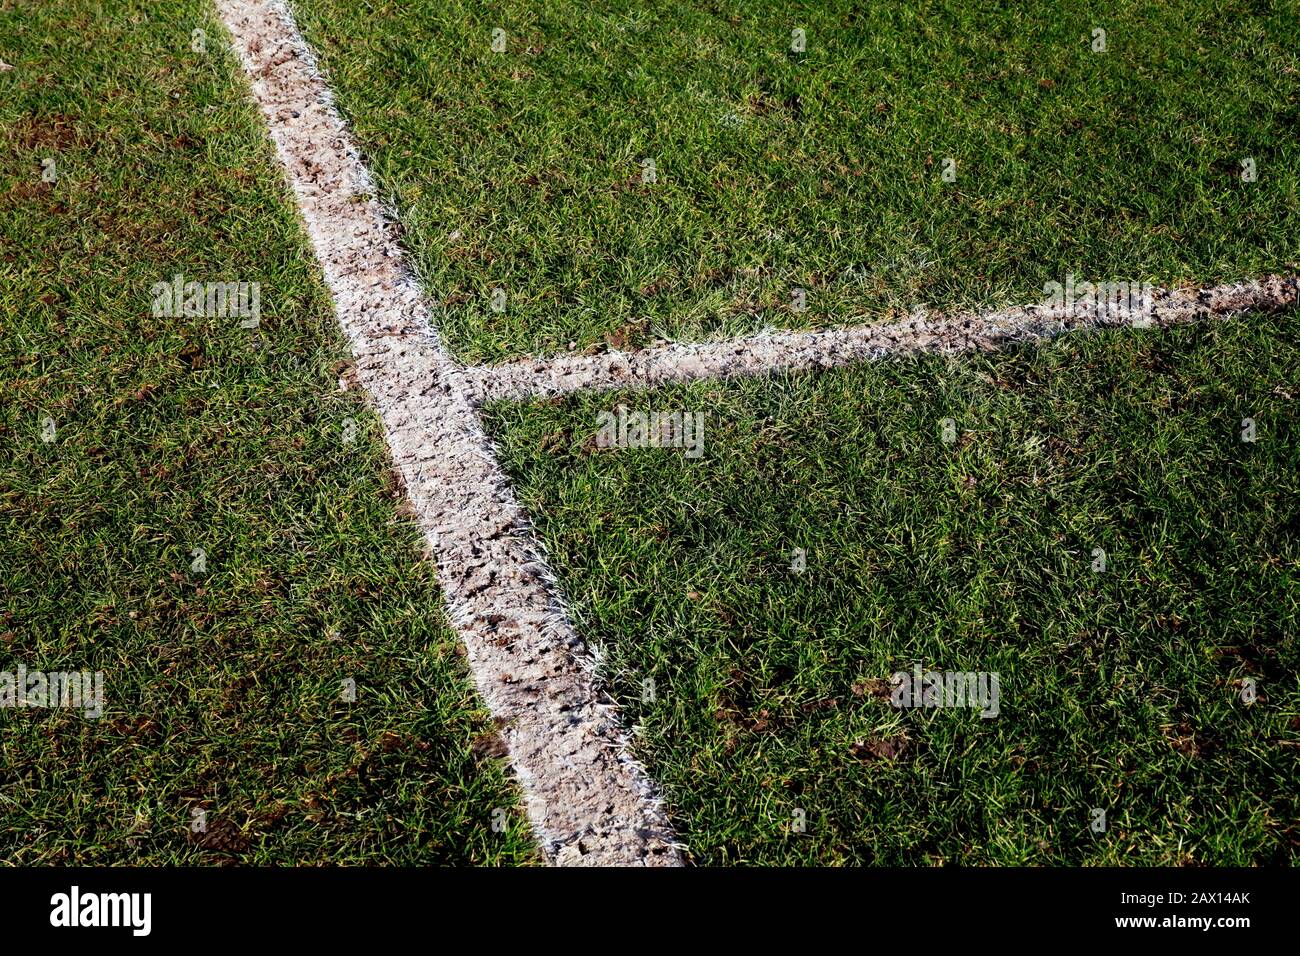 Football field with white lines Stock Photo